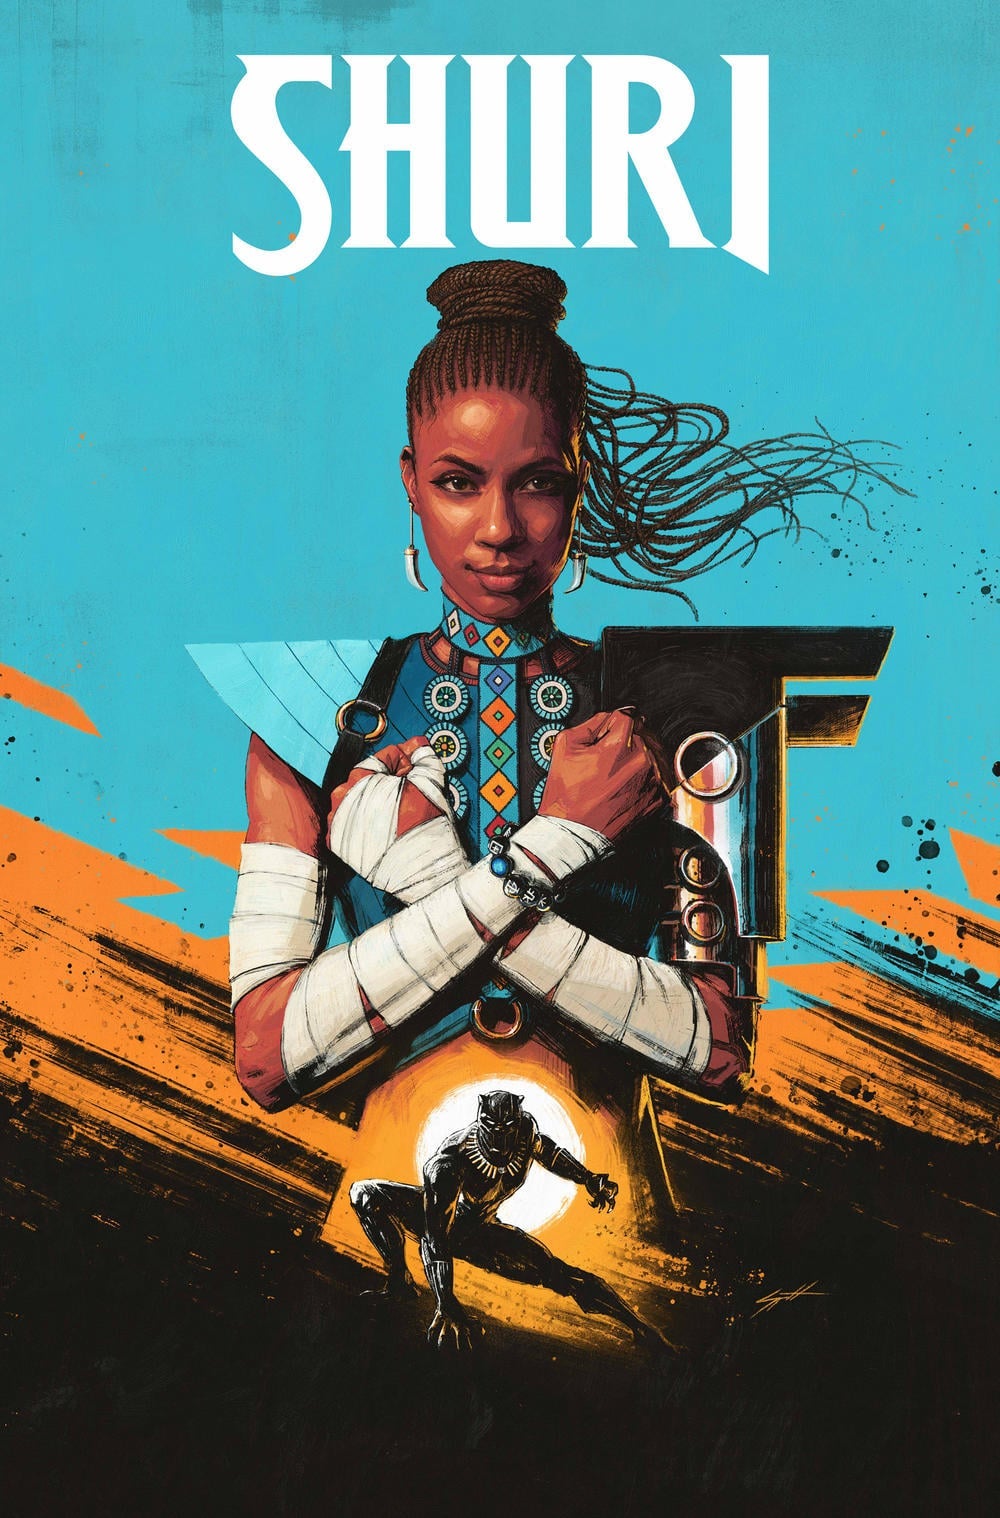 A Beginner's Guide To Afrofuturism: 7 Titles To Watch And Read